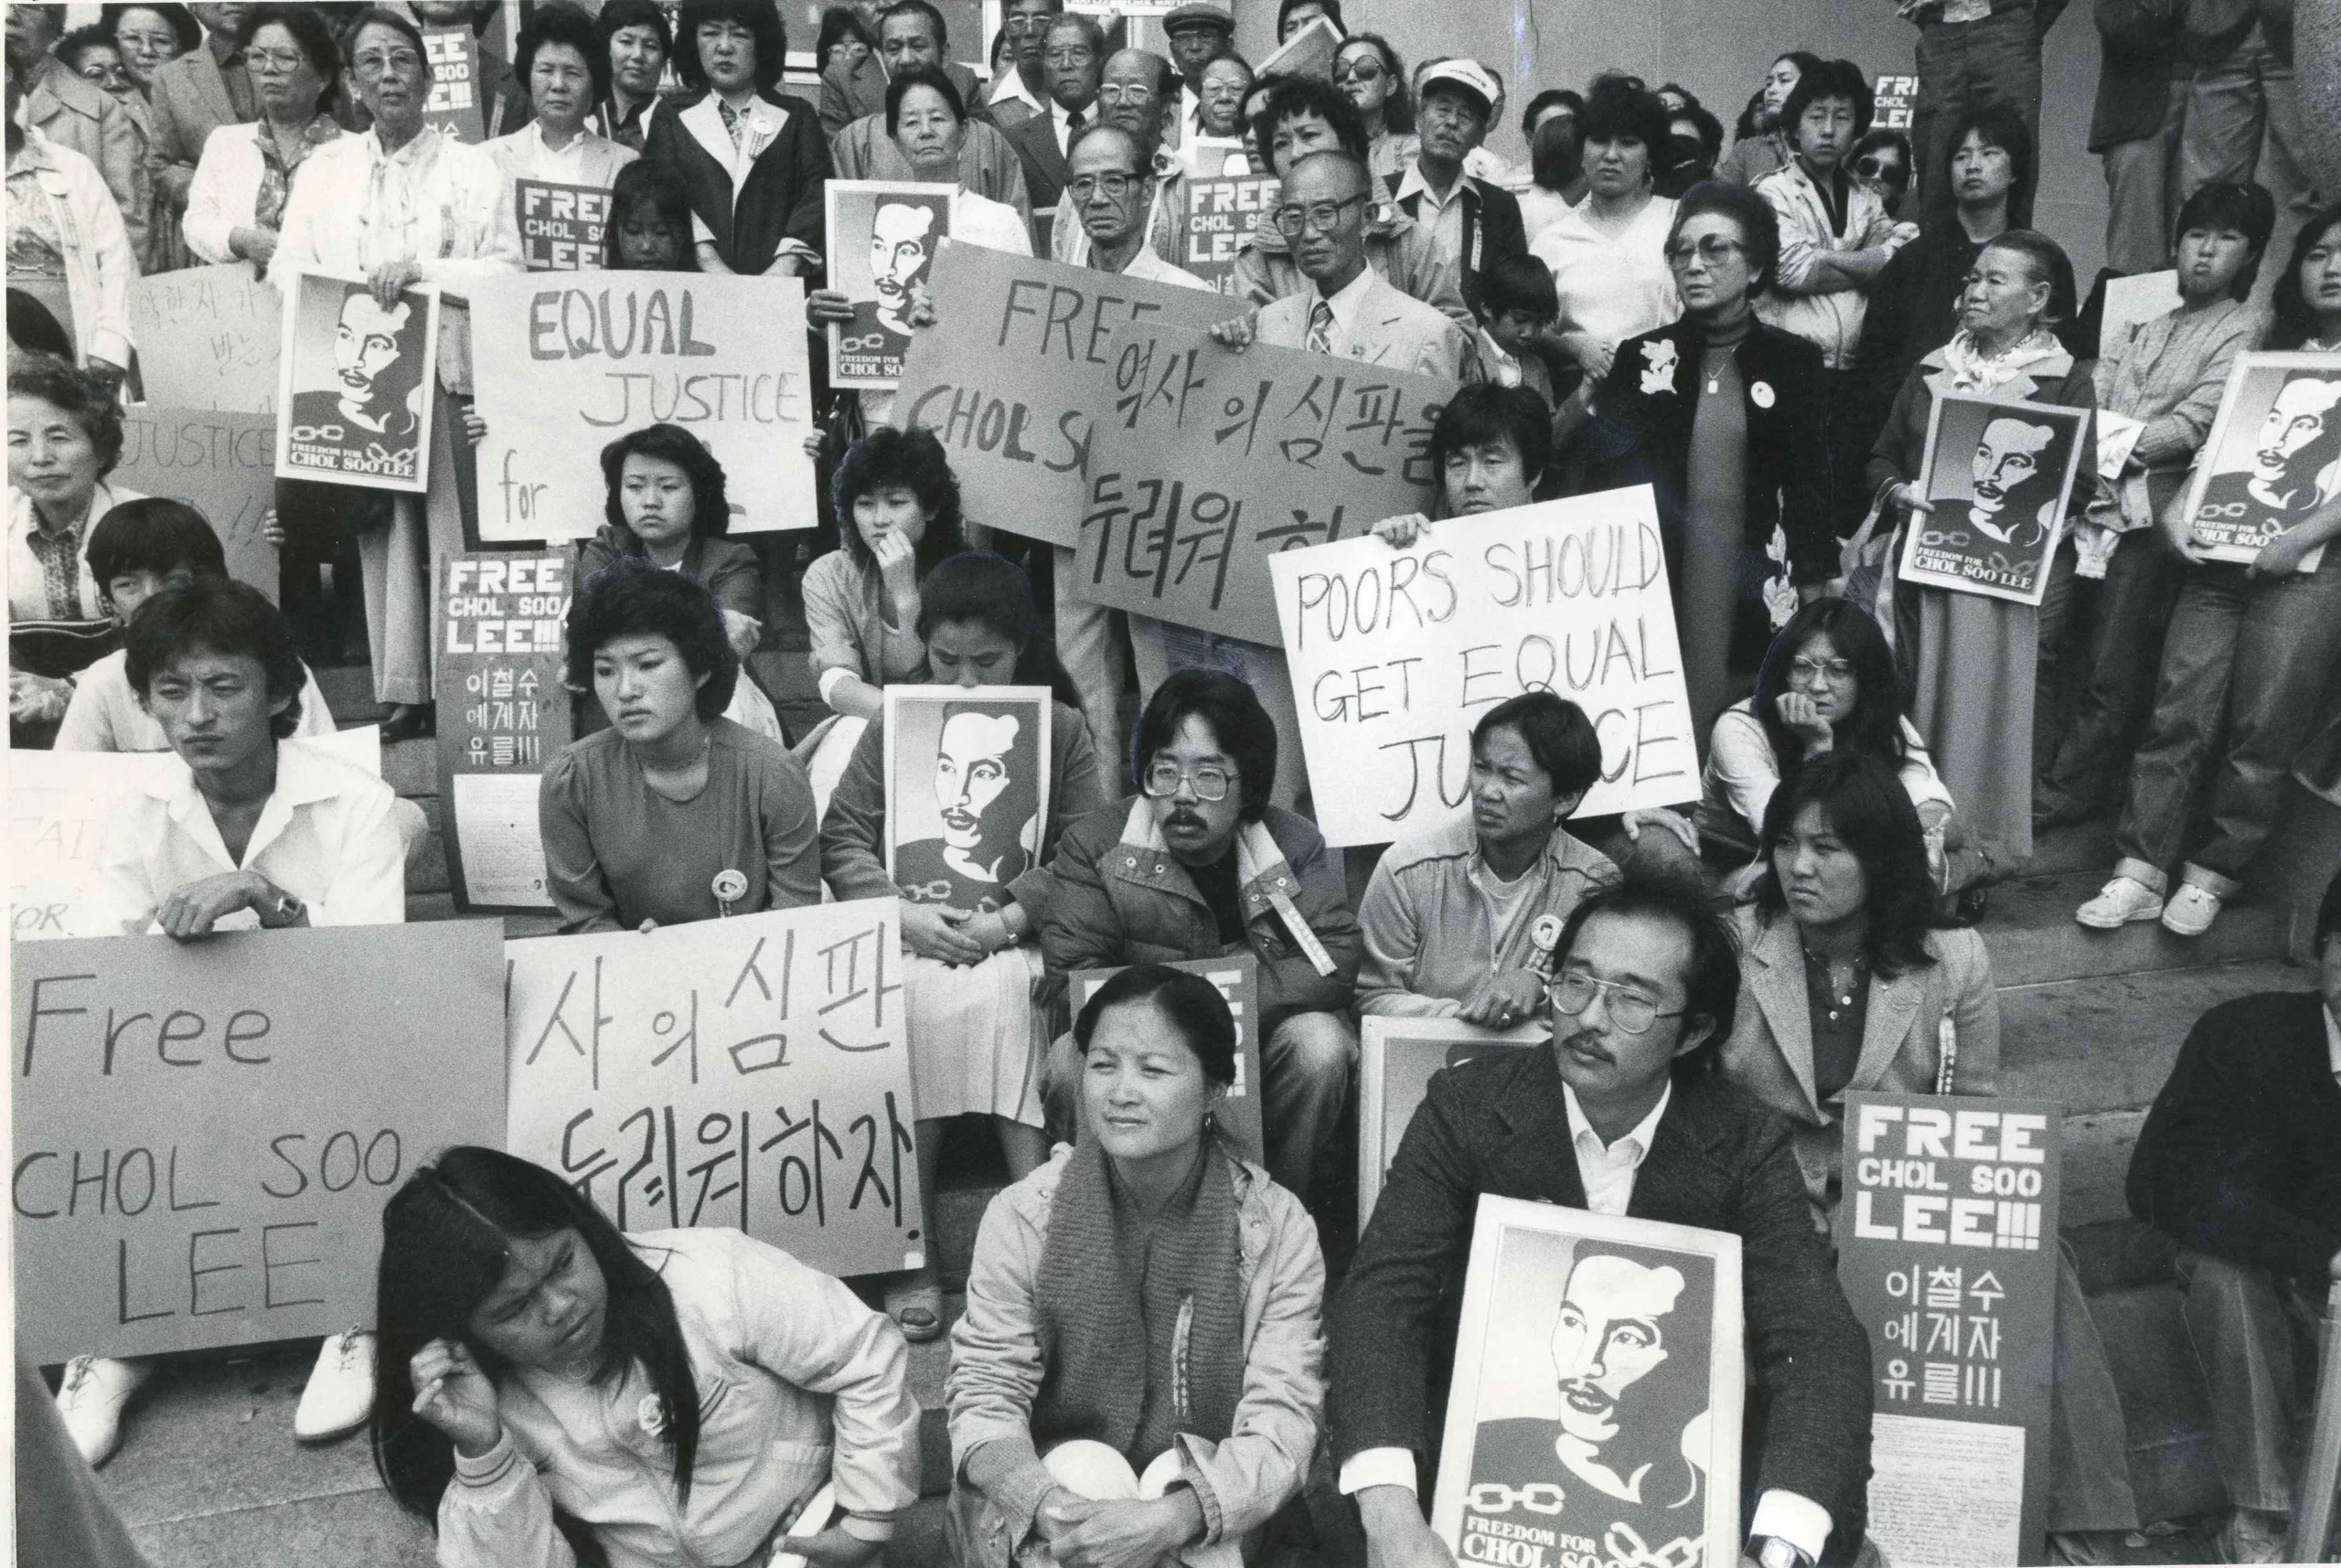 Supporters of Chol Soo Lee at the Hall of Justice in San Francisco in 1982. (Image: Jerry Telfer/San Francisco Chronicle via AP)